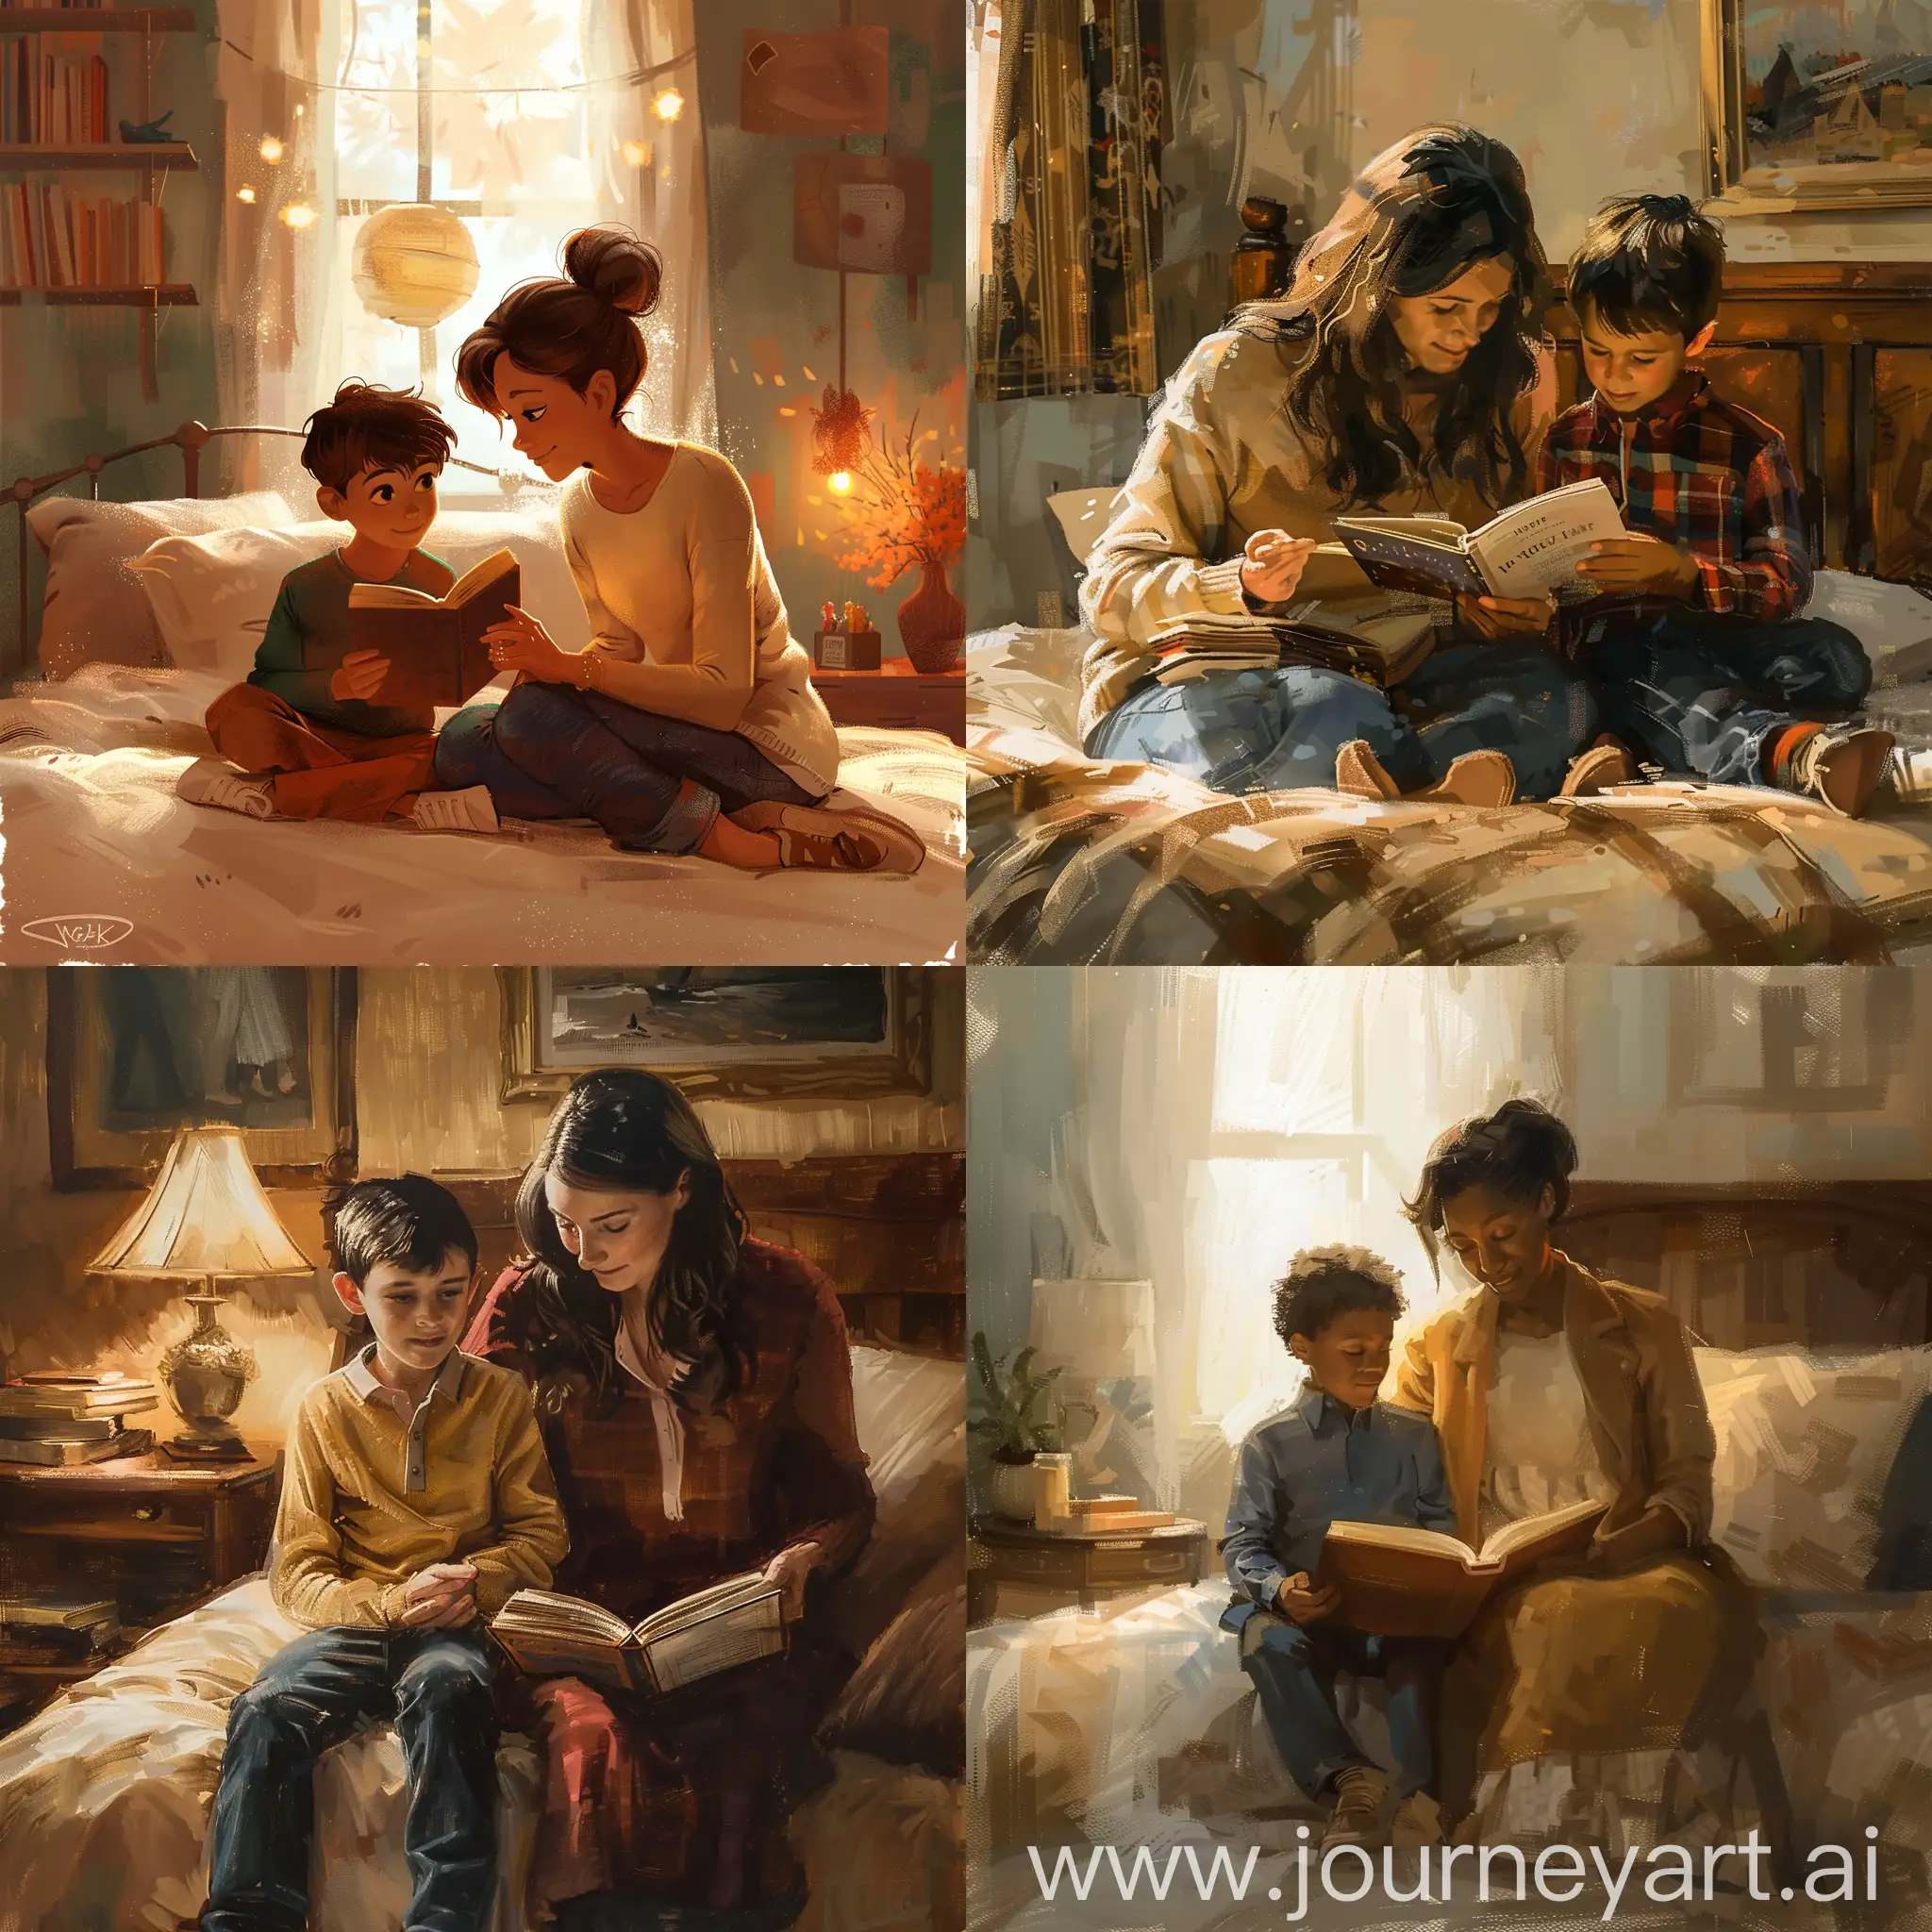 Mother-and-Son-Reading-Together-in-Cozy-Bedroom-Scene